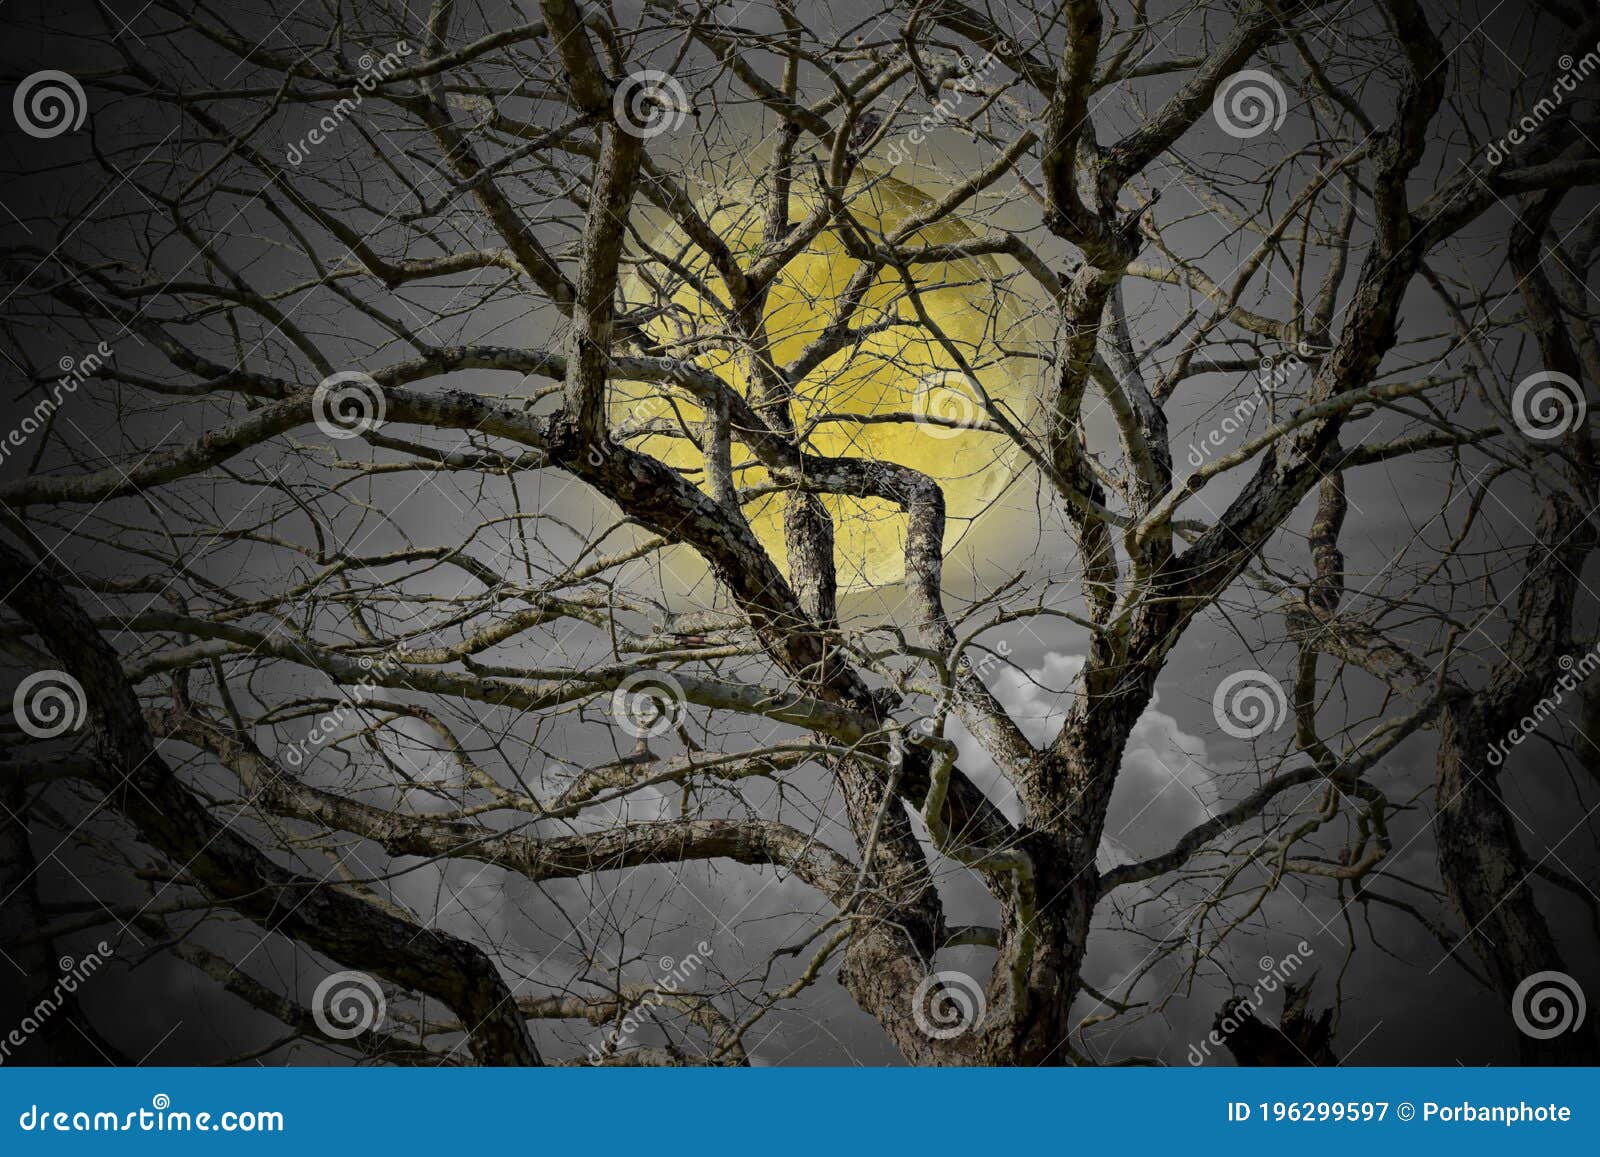 Halloween Concept: Spooky Forest with Full Moon and Dead Trees, Dark Horror  Background Stock Image - Image of glow, halloween: 196299597